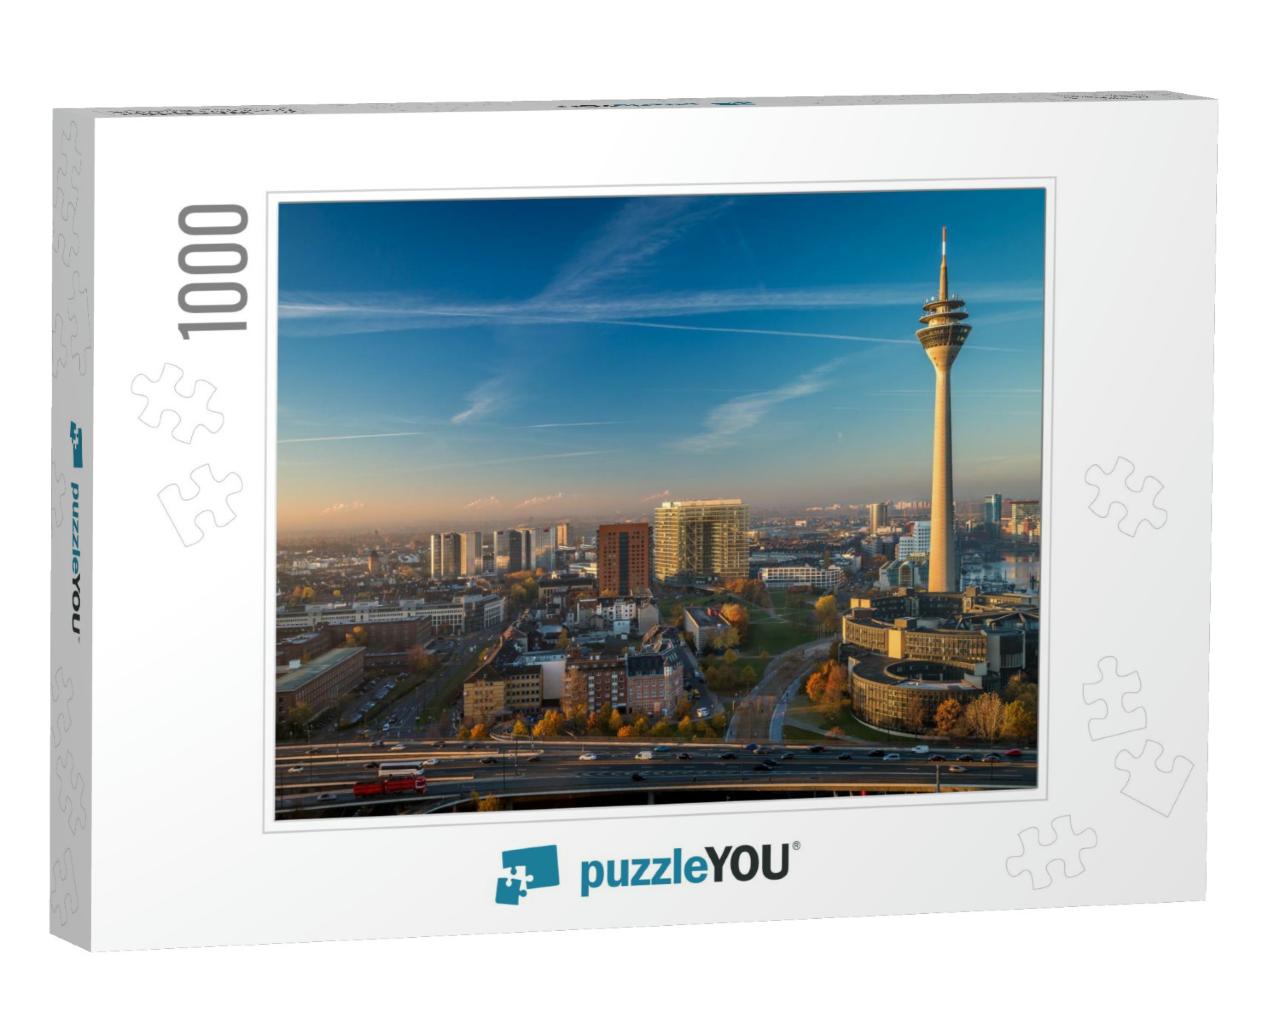 Tv Tower Dusseldorf Old Town, Duesseldorf Fernsehturm... Jigsaw Puzzle with 1000 pieces